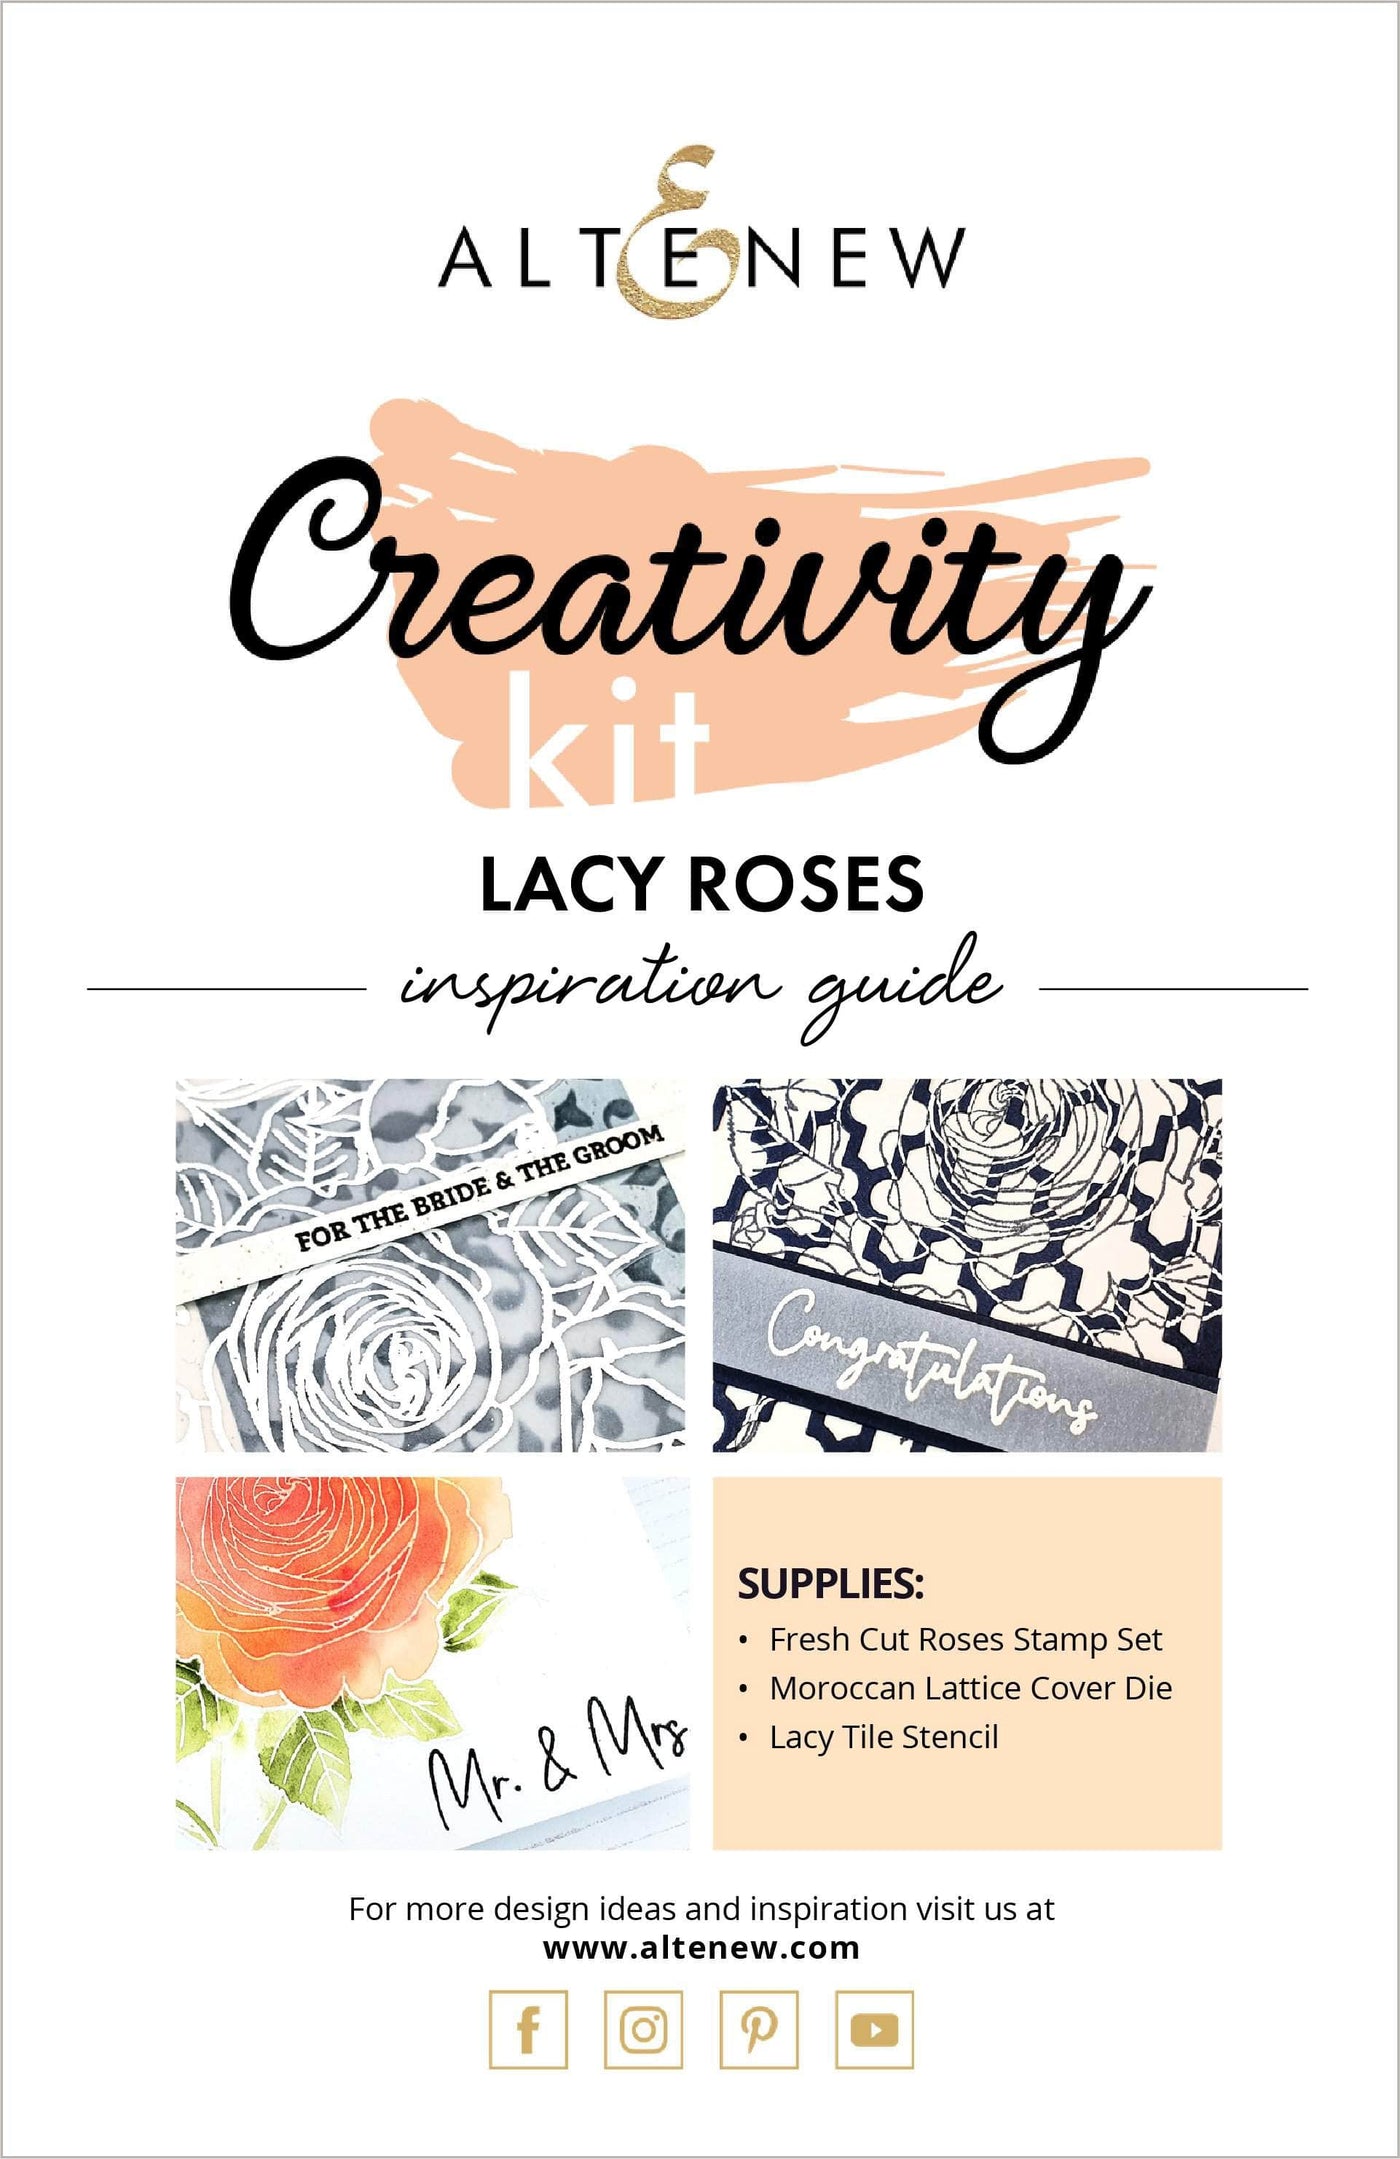 Printed Media Lacy Roses Creativity Cardmaking Kit Inspiration Guide